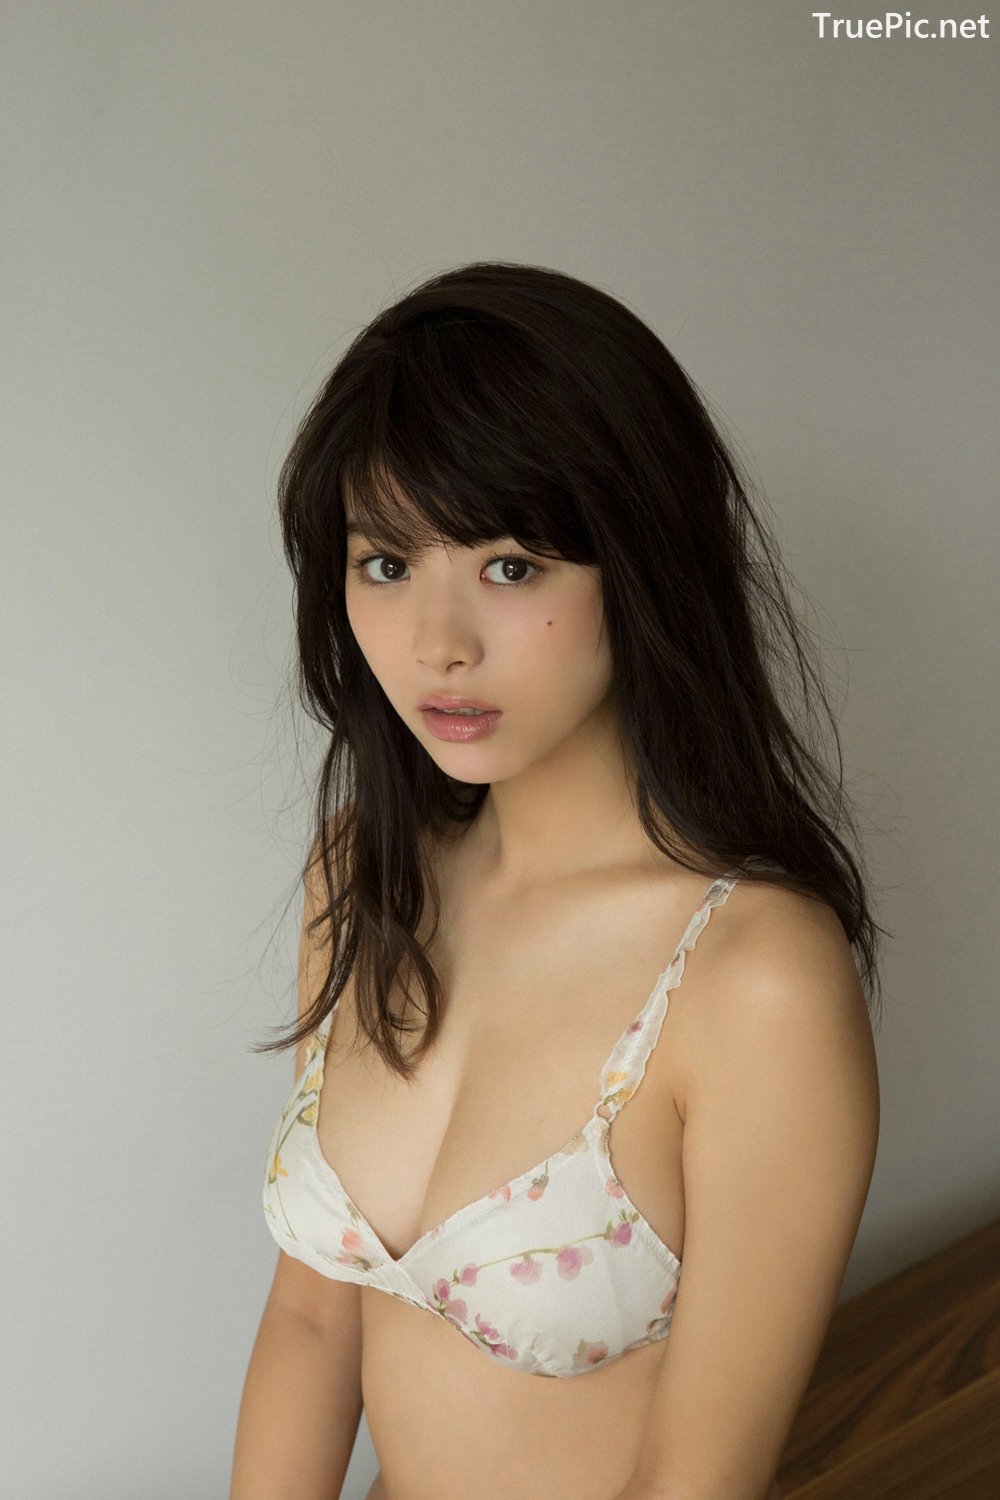 Japanese Actress And Model - Fumika Baba - YS Web Vol.729 - TruePic.net - Picture-89